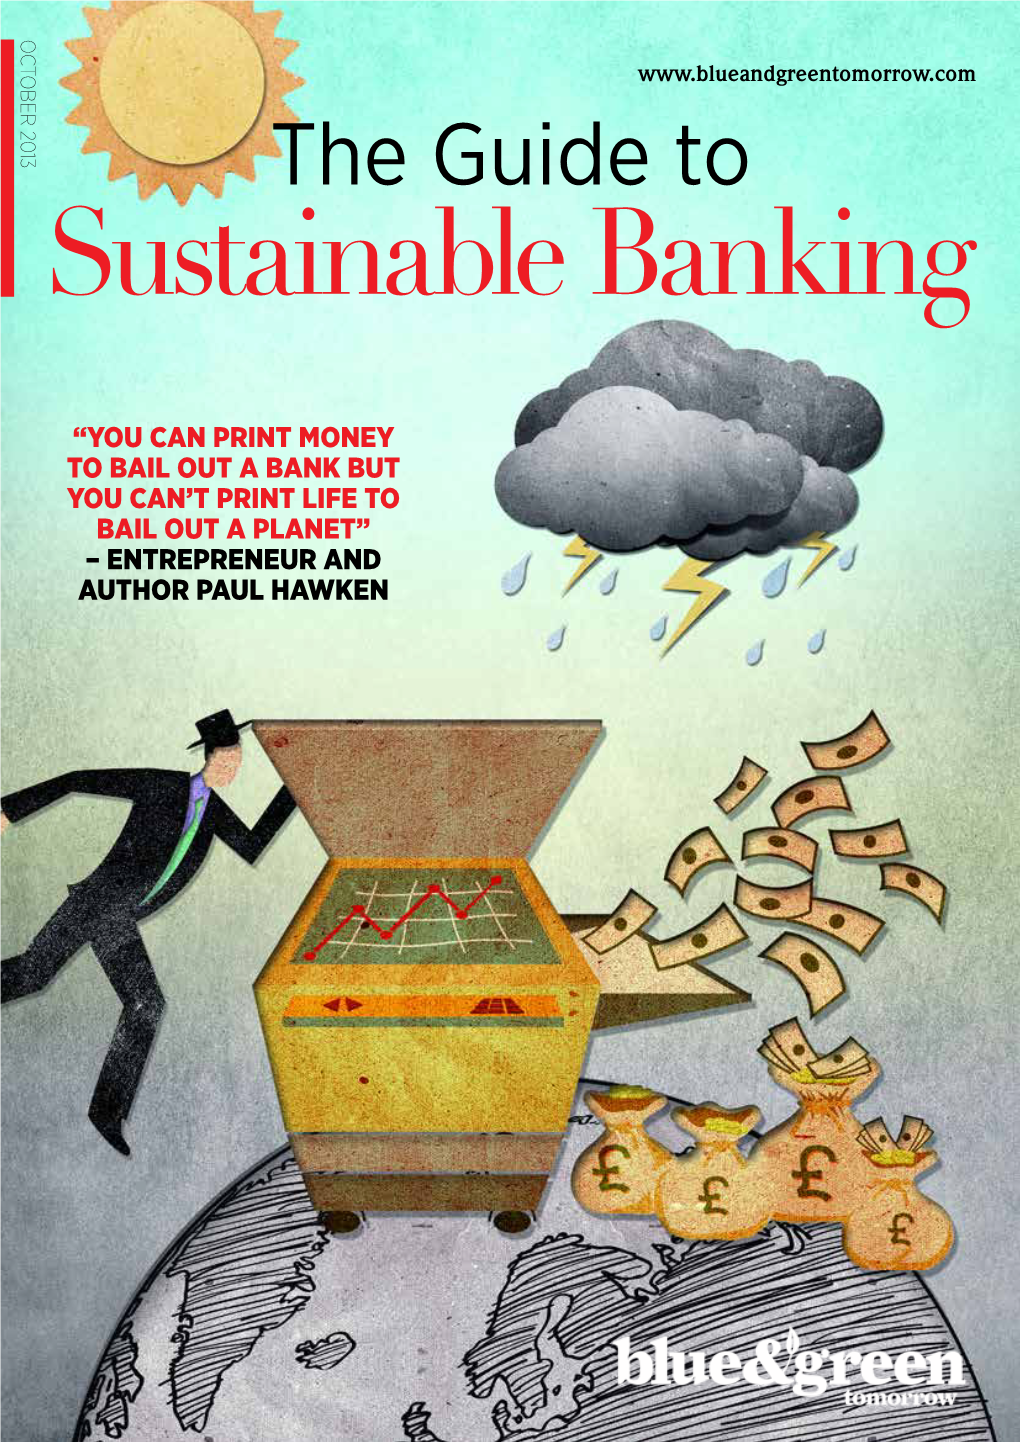 The Guide to Sustainable Banking